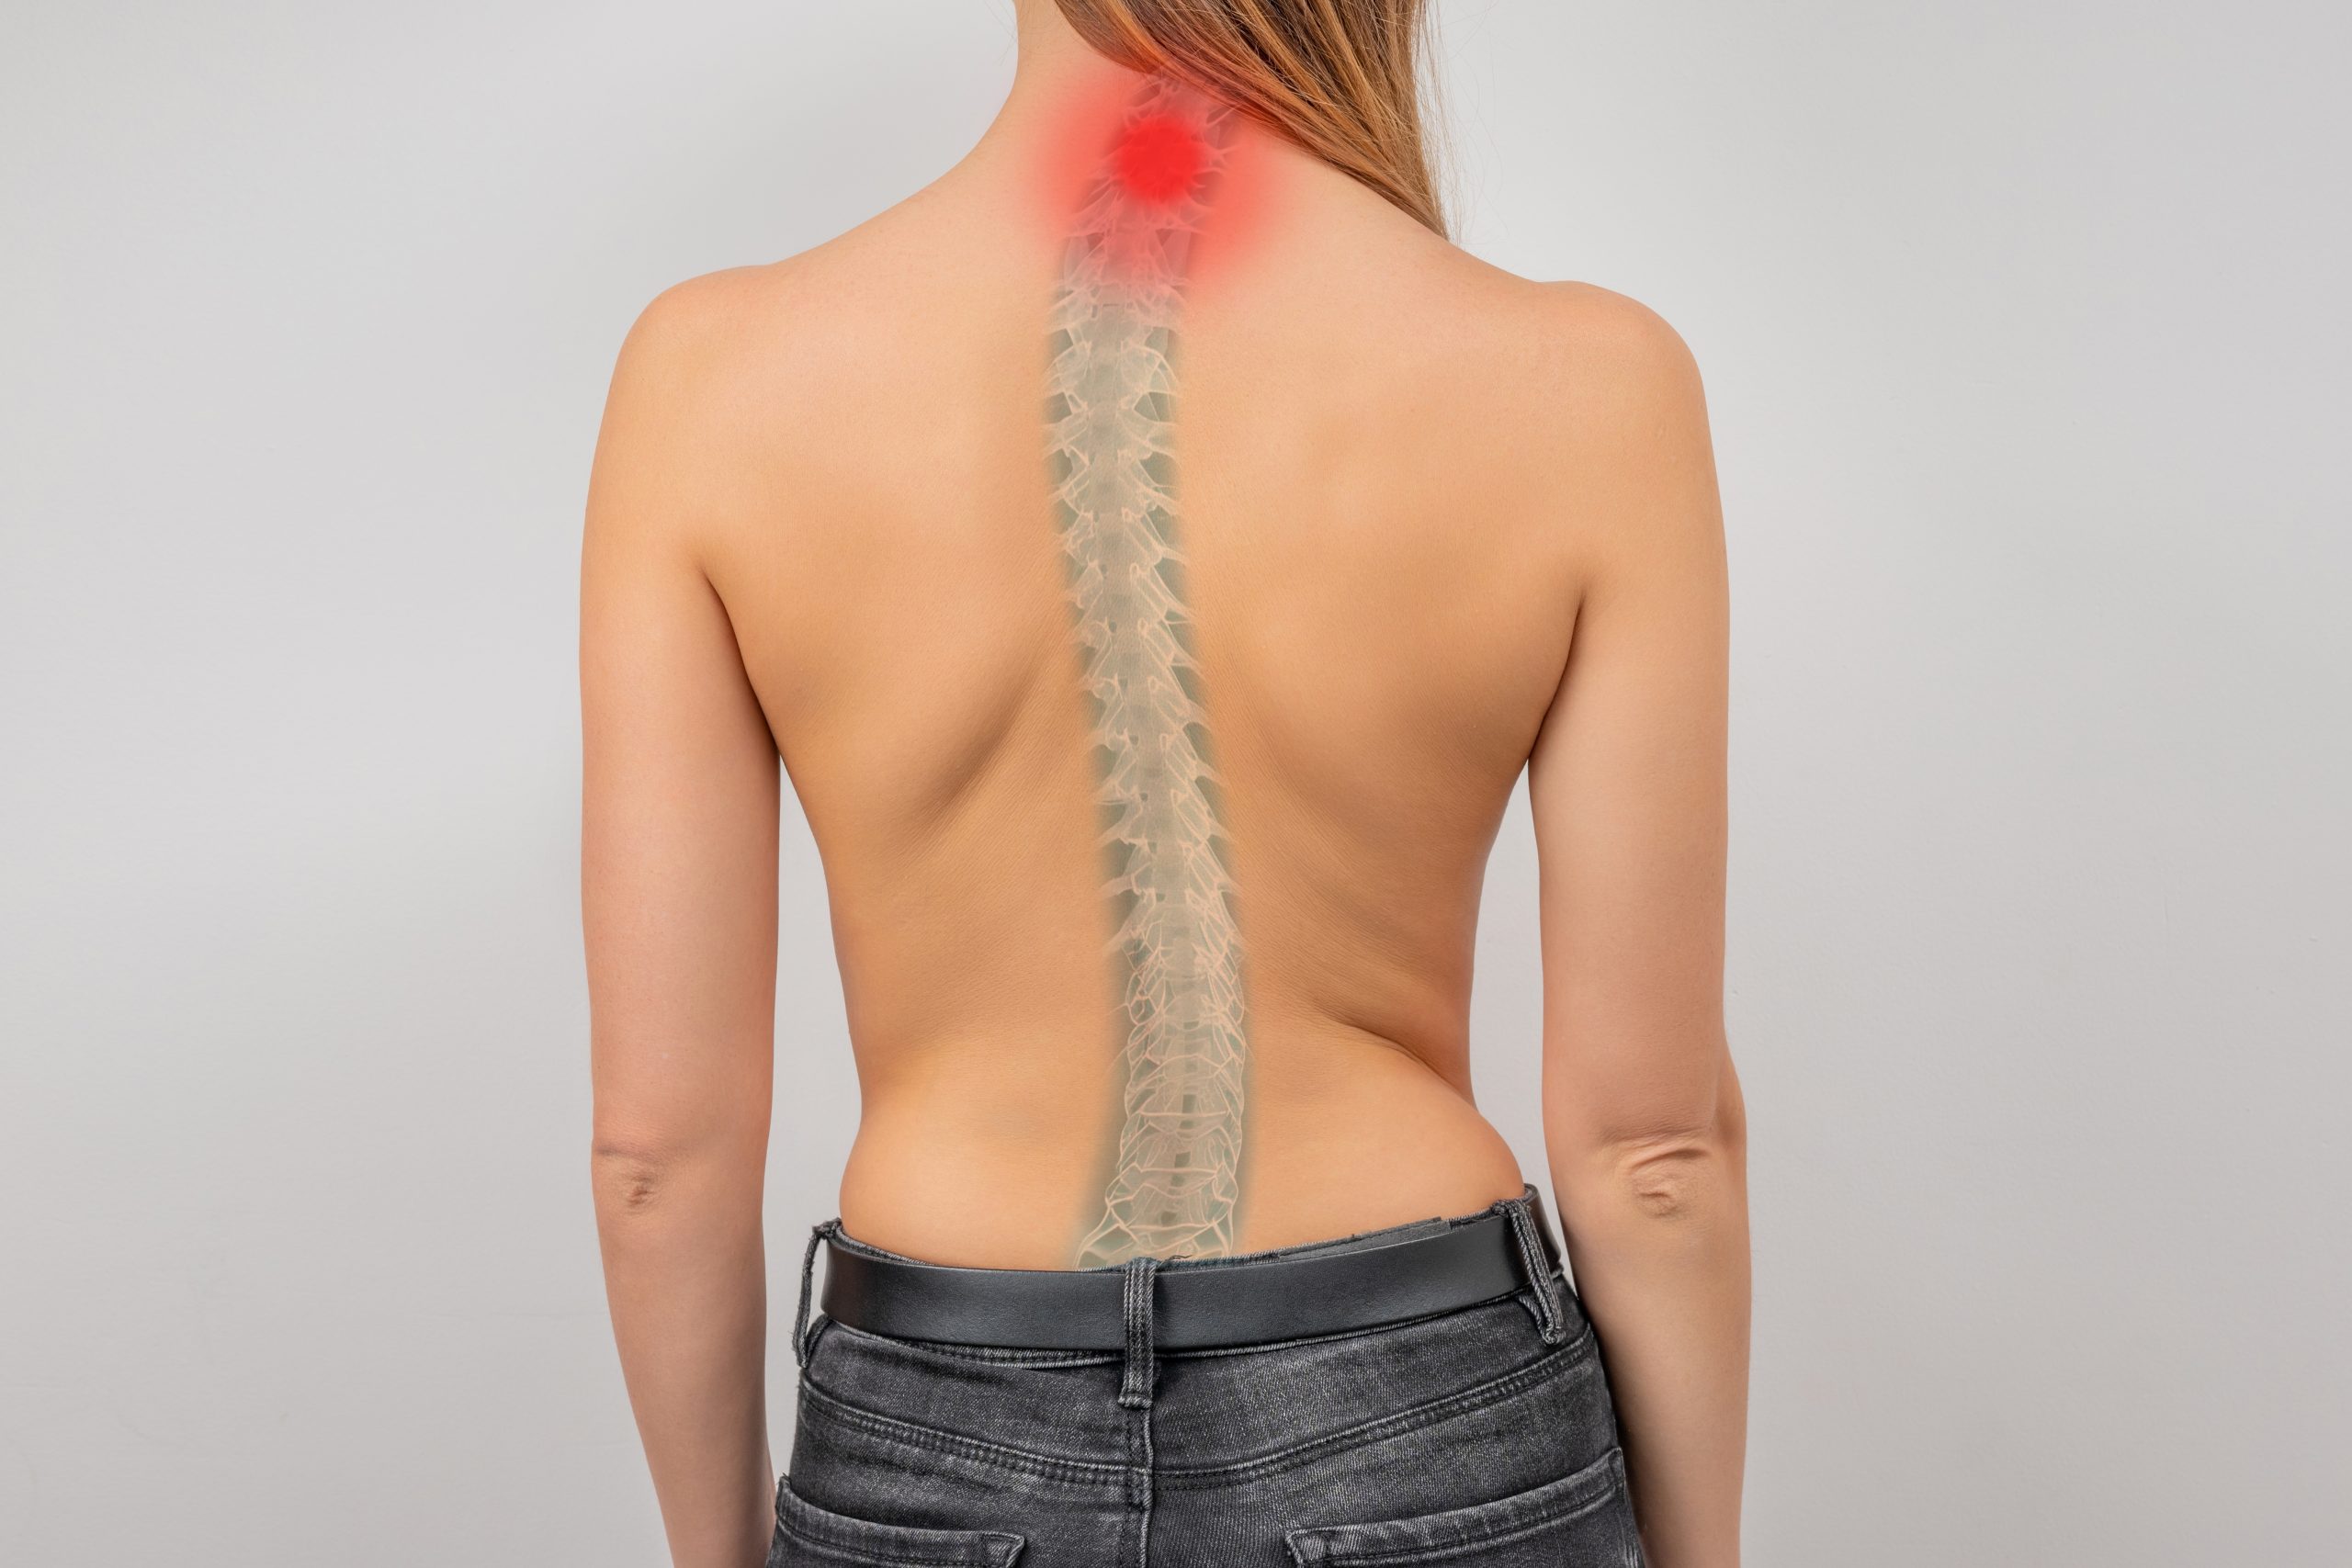 Cervical Lordosis Chiropractic Treatment Near Lake Stevens, WA